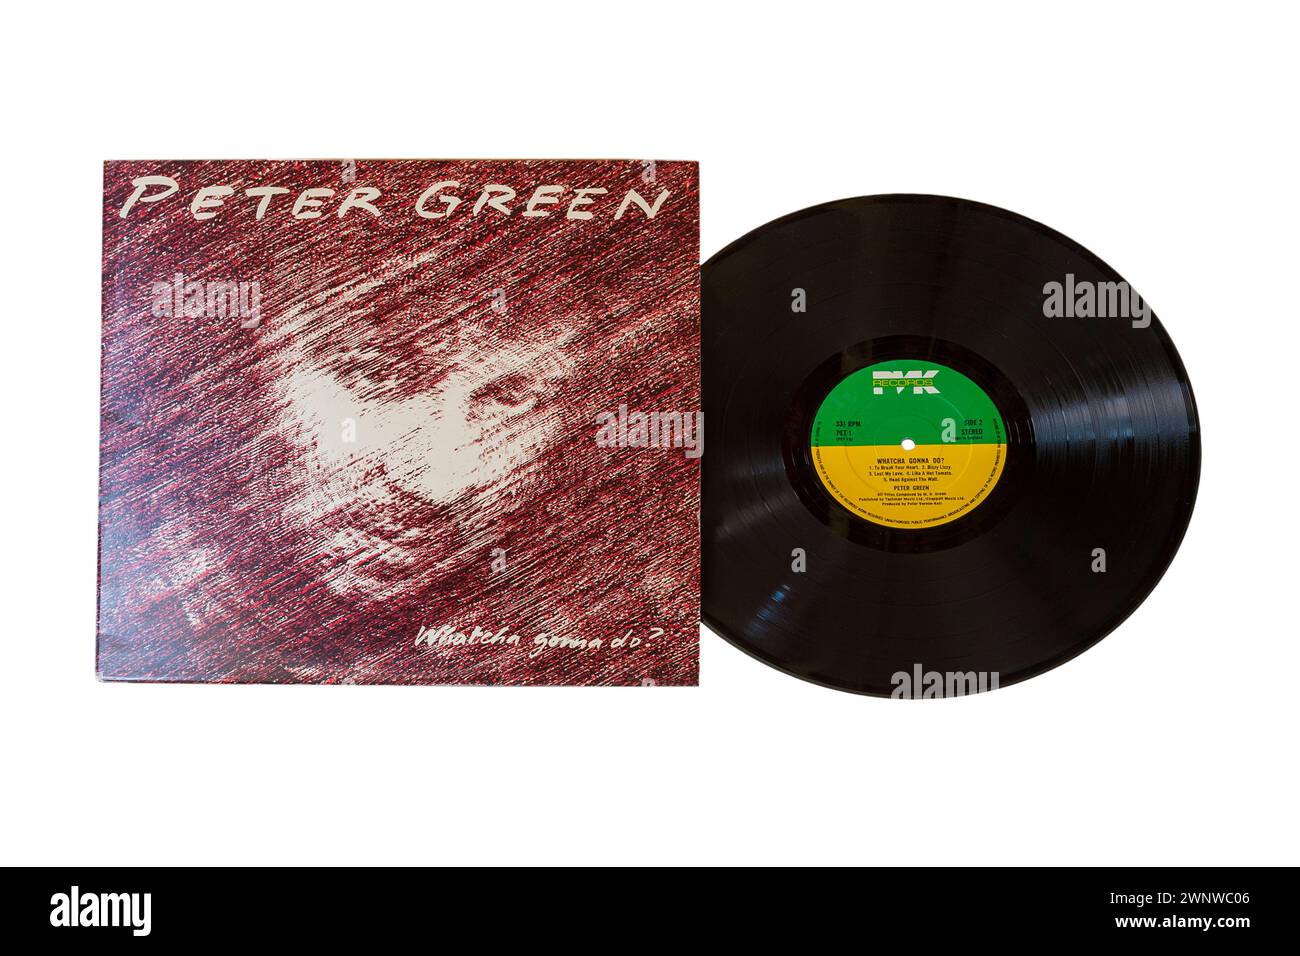 Peter Green Whatcha gonna do? vinyl record album LP cover isolated on white background - 1981 Stock Photo